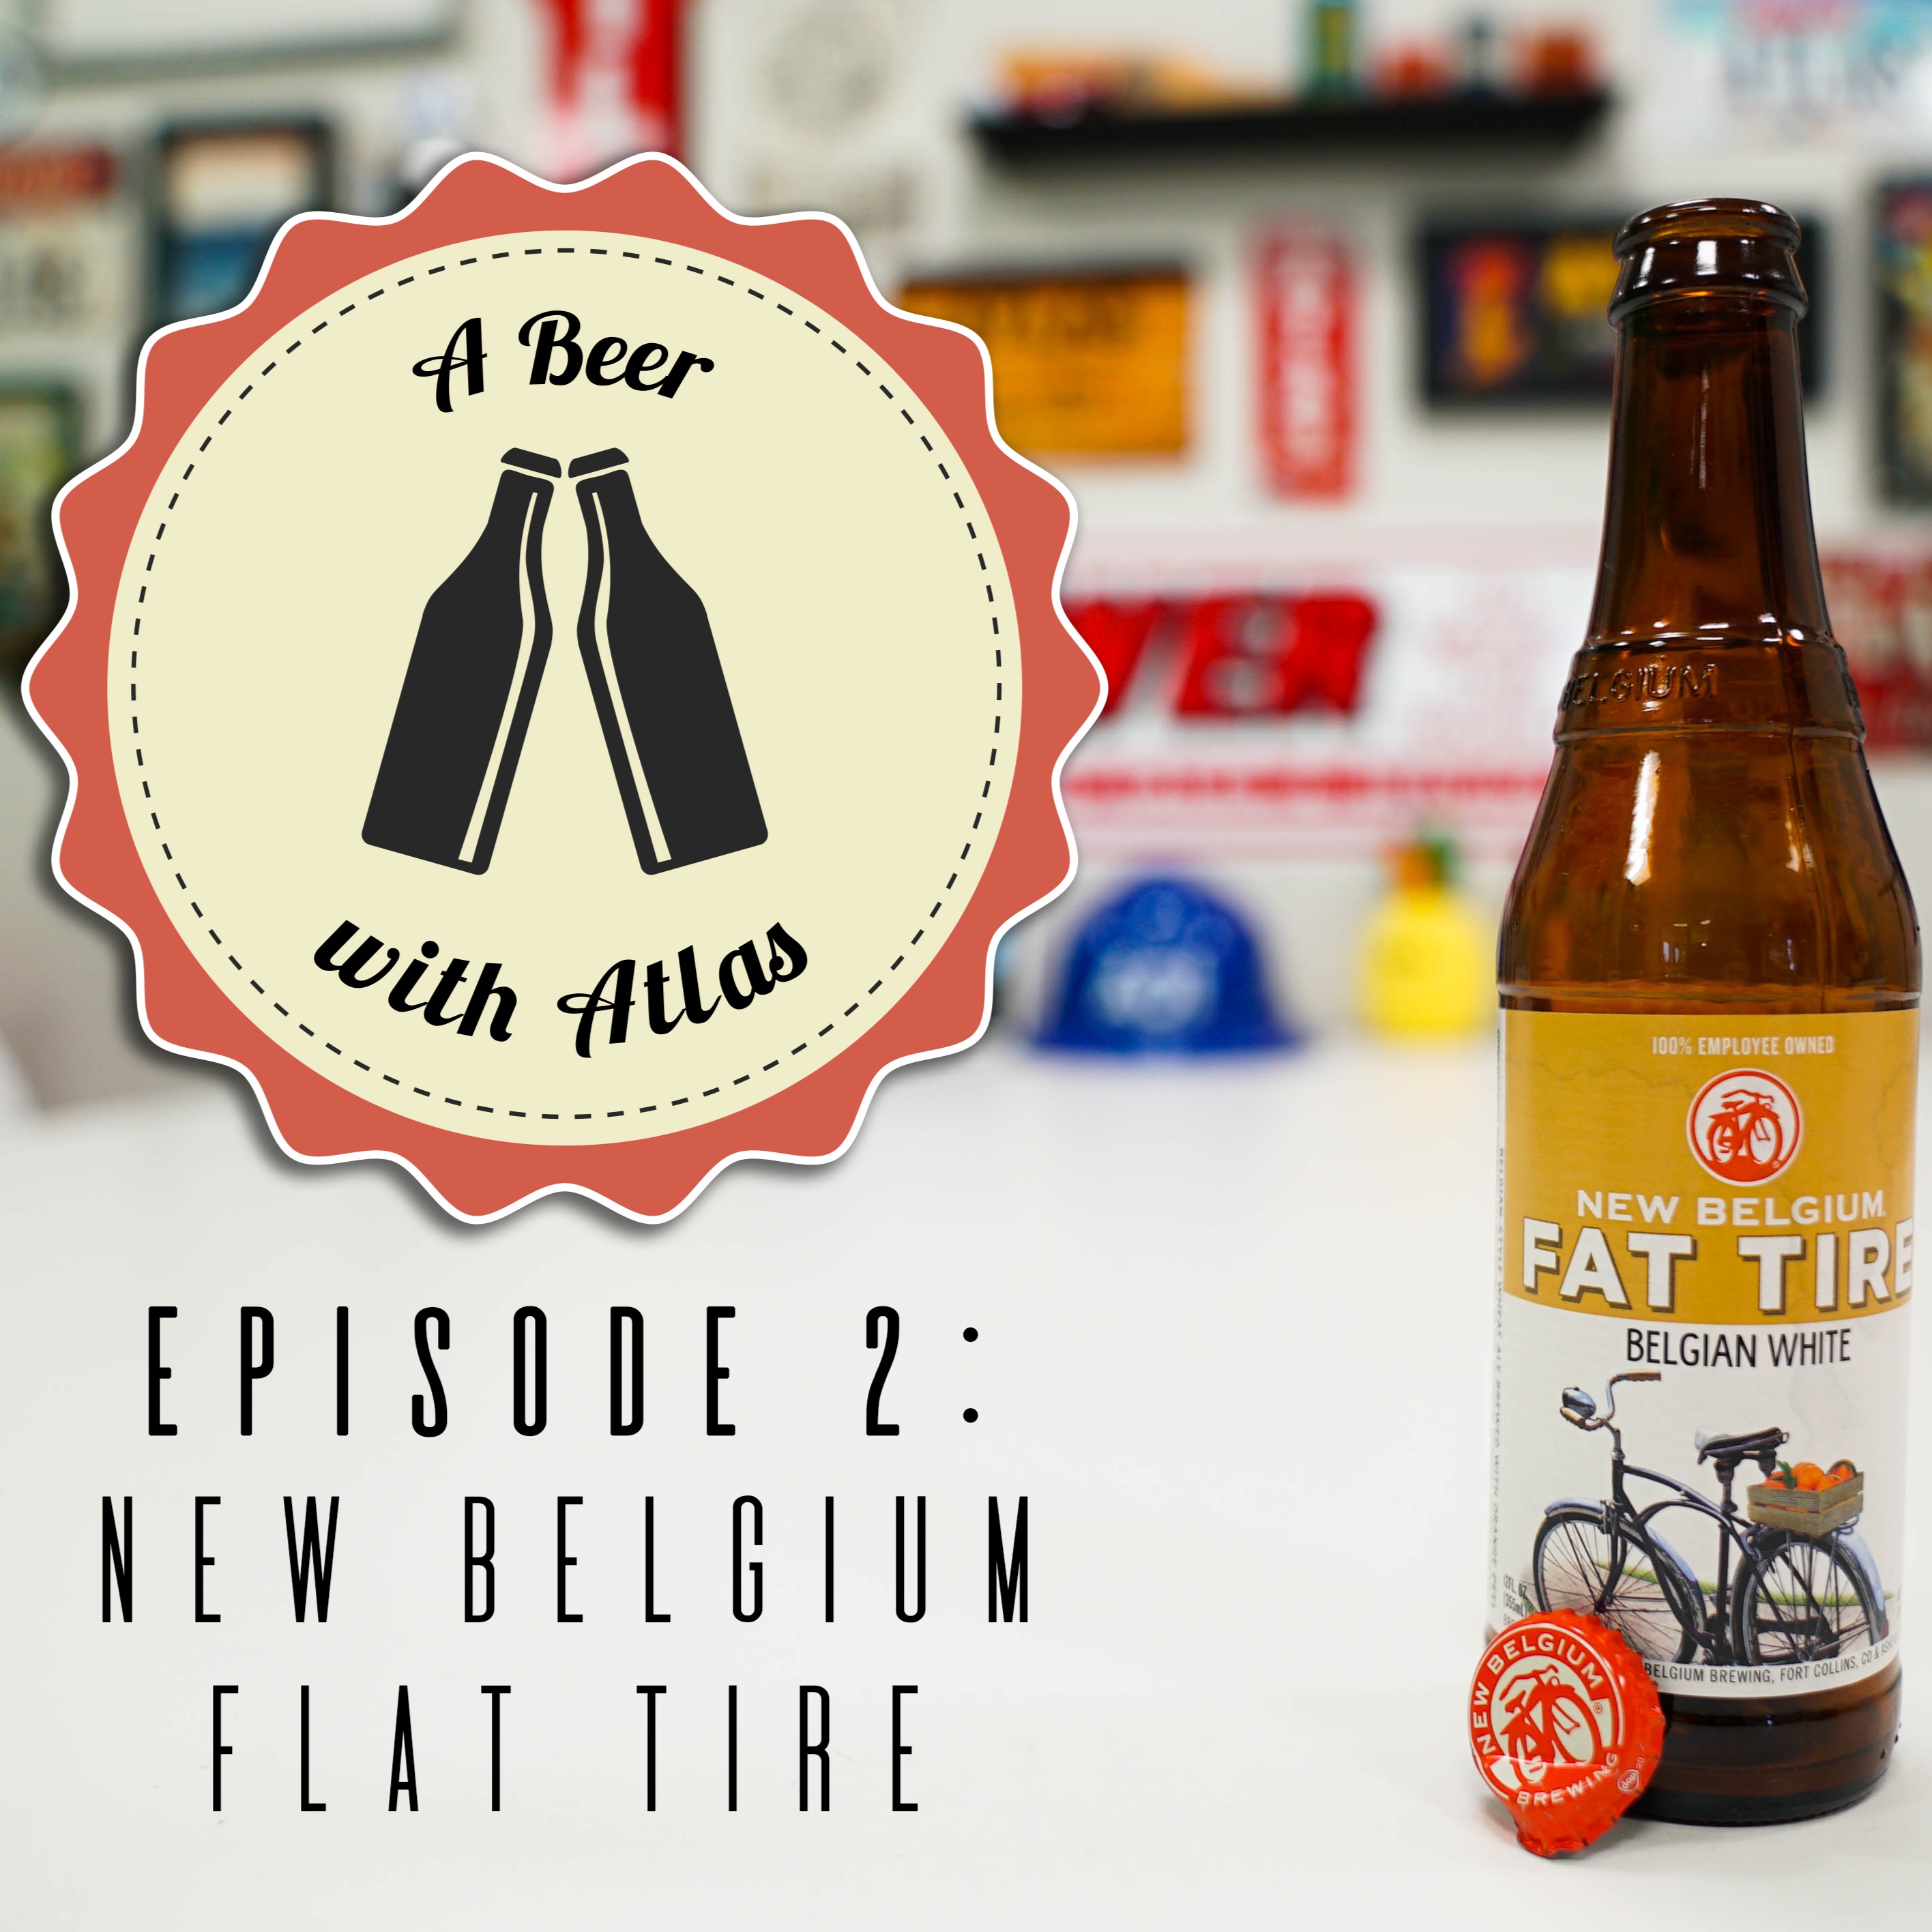 Fat Tire Belgium White - A Beer with Atlas #2